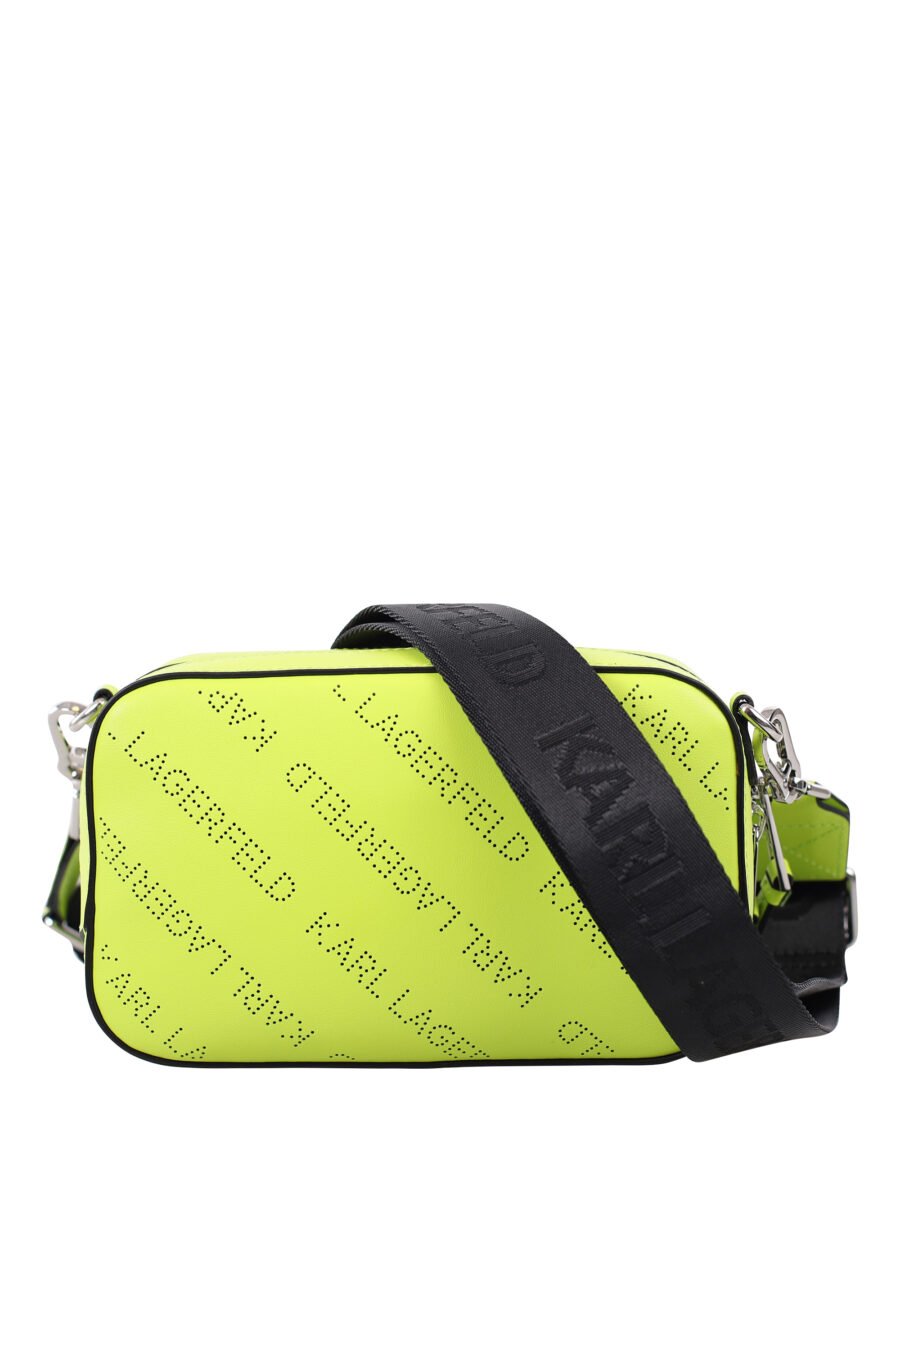 Lime green shoulder bag with perforated logo - IMG 1751